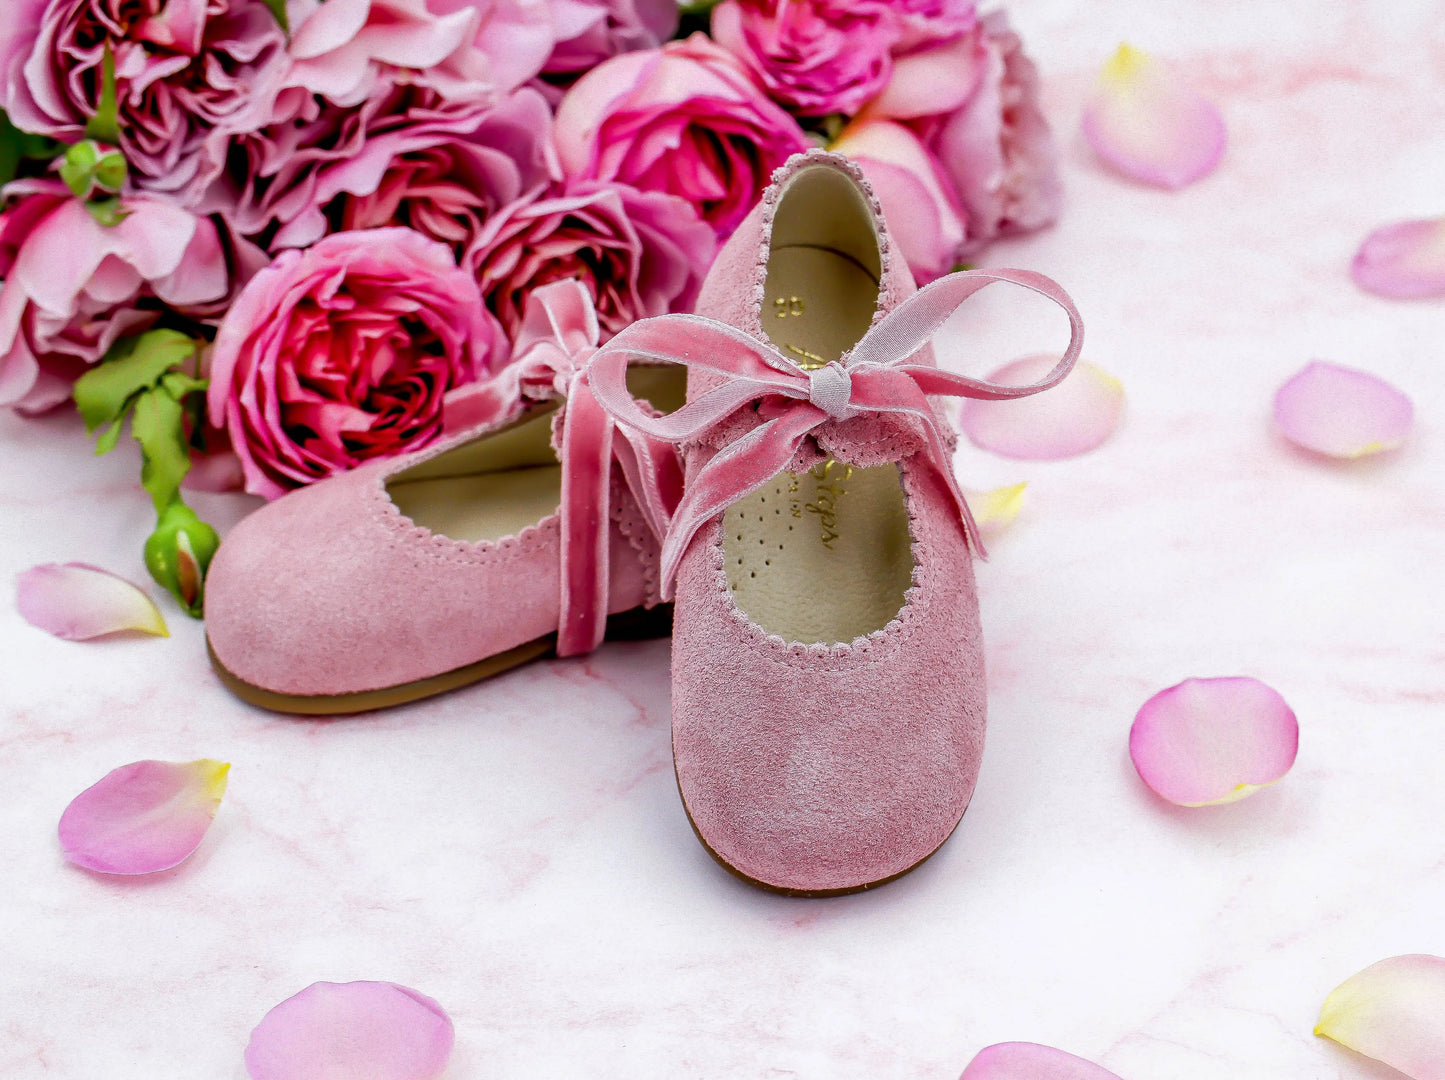 Rosa- Pink Suede Mary Jane Shoes - Amati Steps